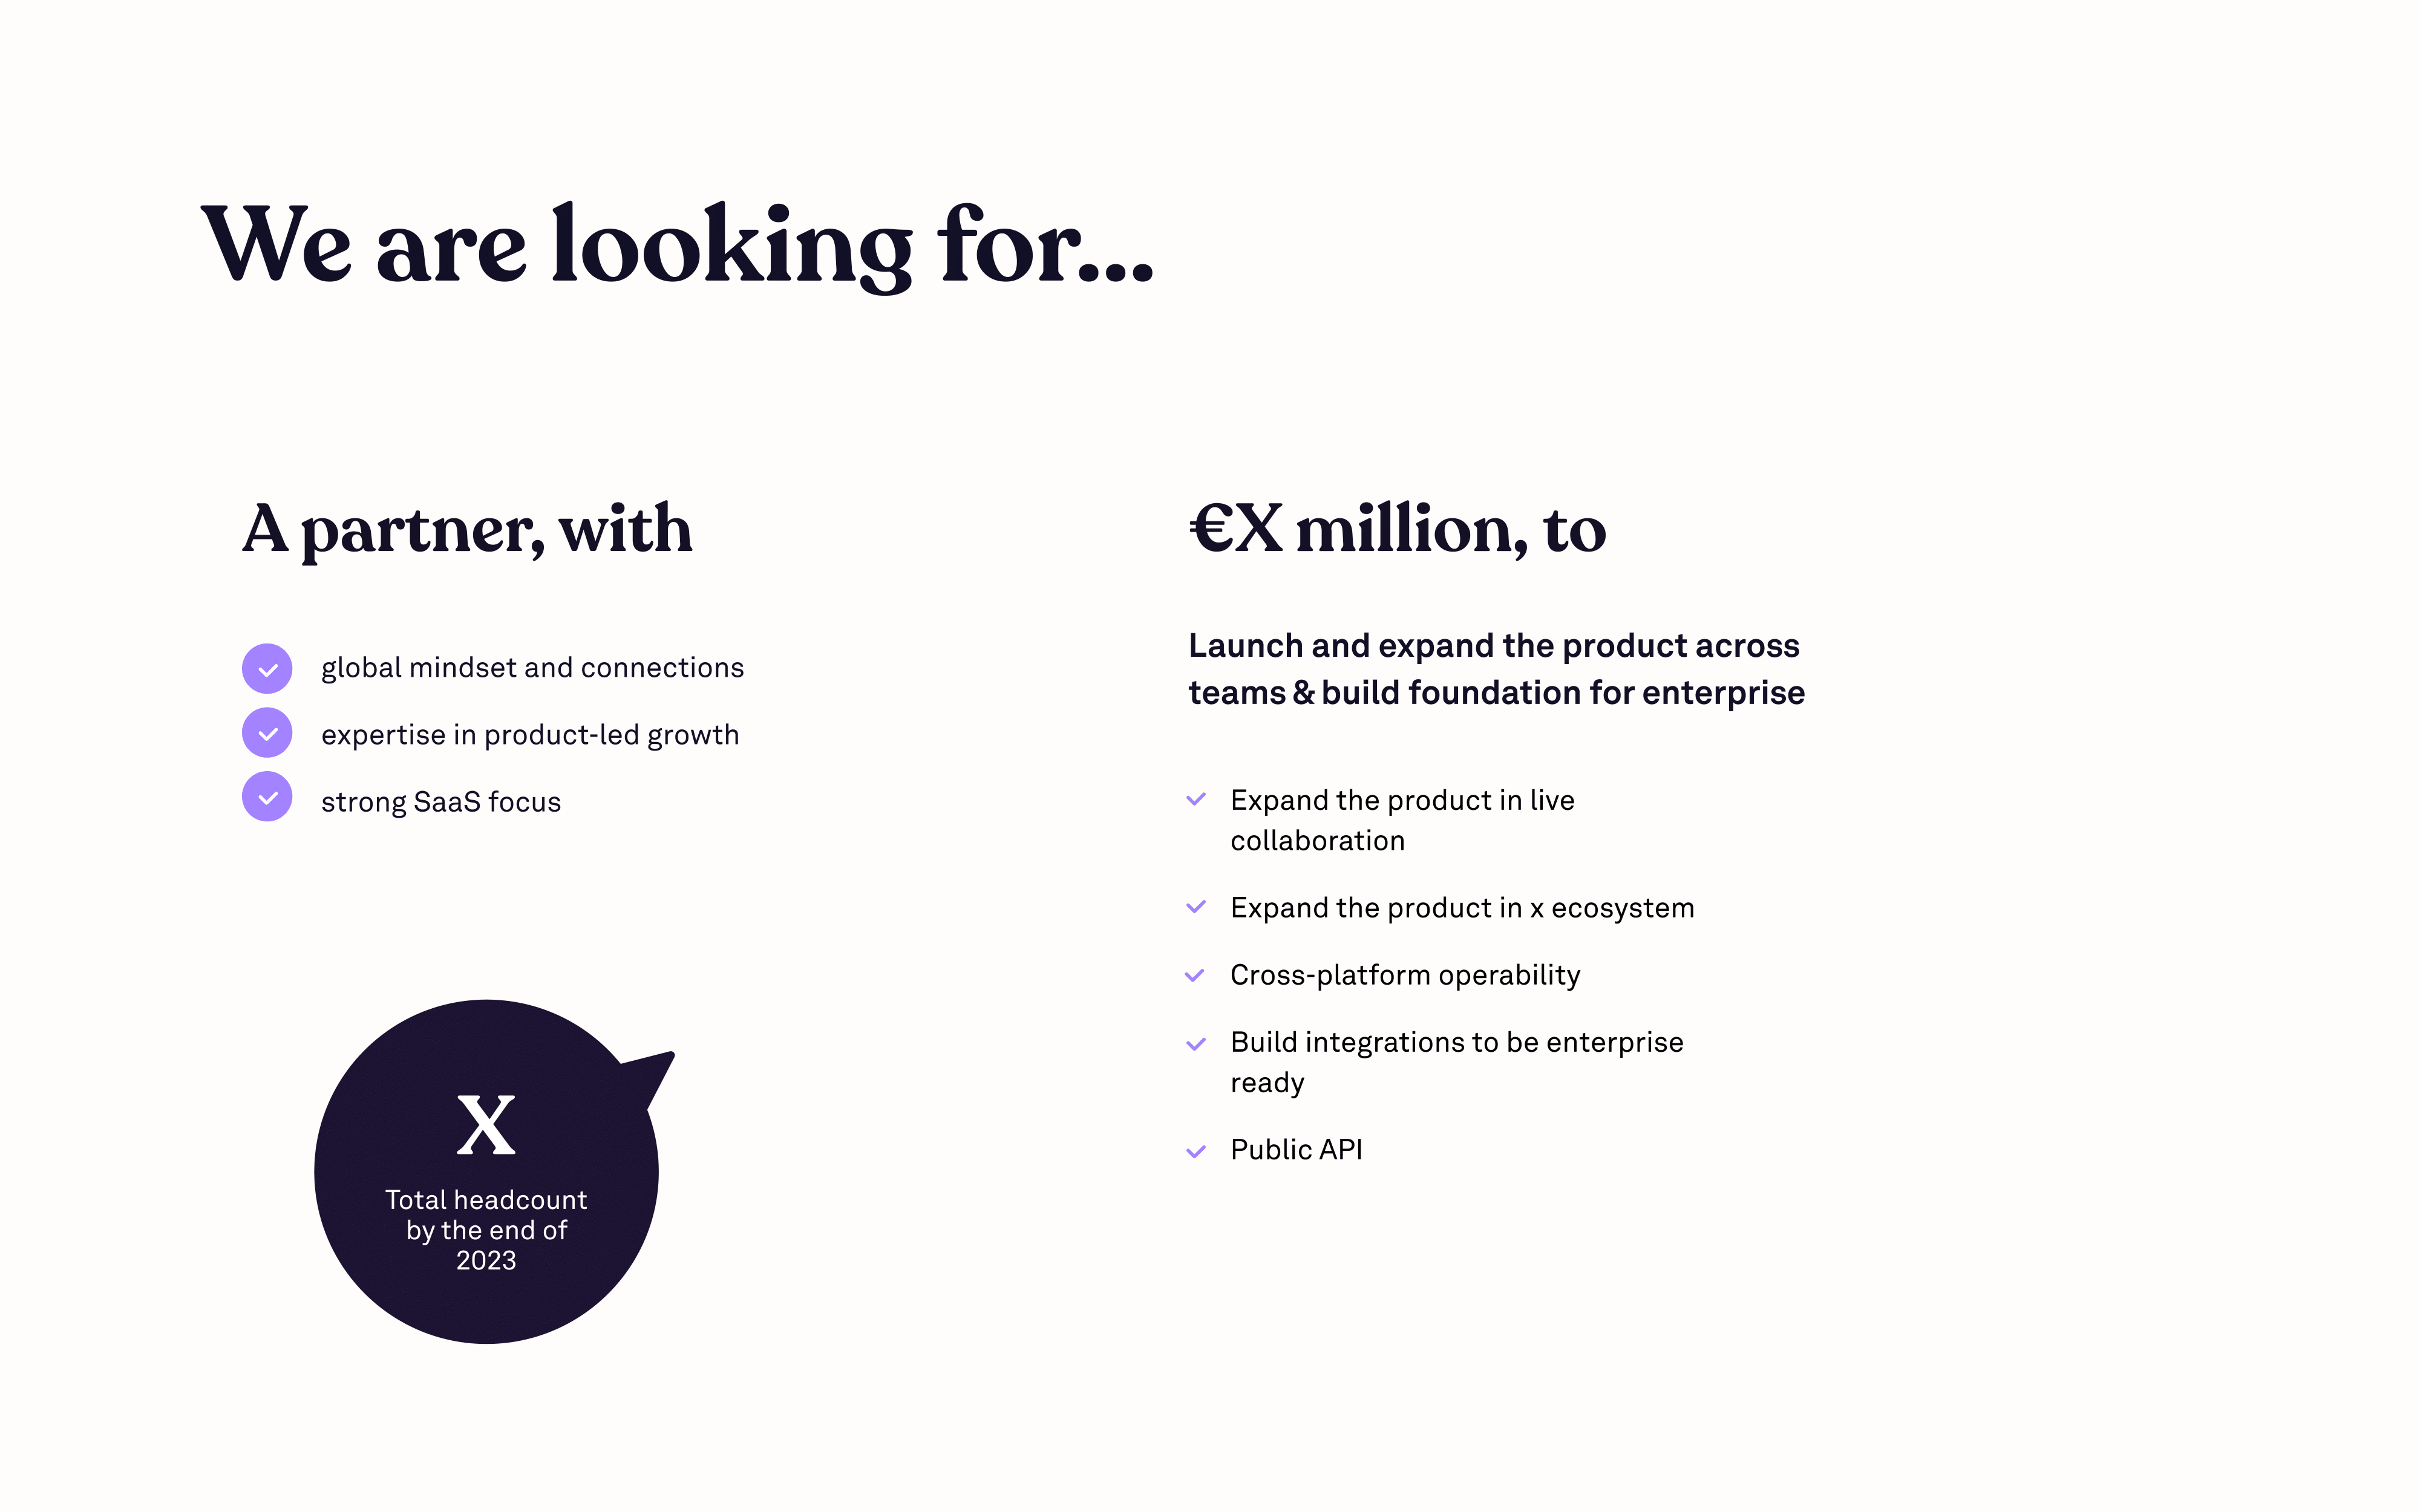 Ask slide to investors. Scrintal is looking for a partner with global mindset and connections, expertise in product-led growth, and strong SaaS focus